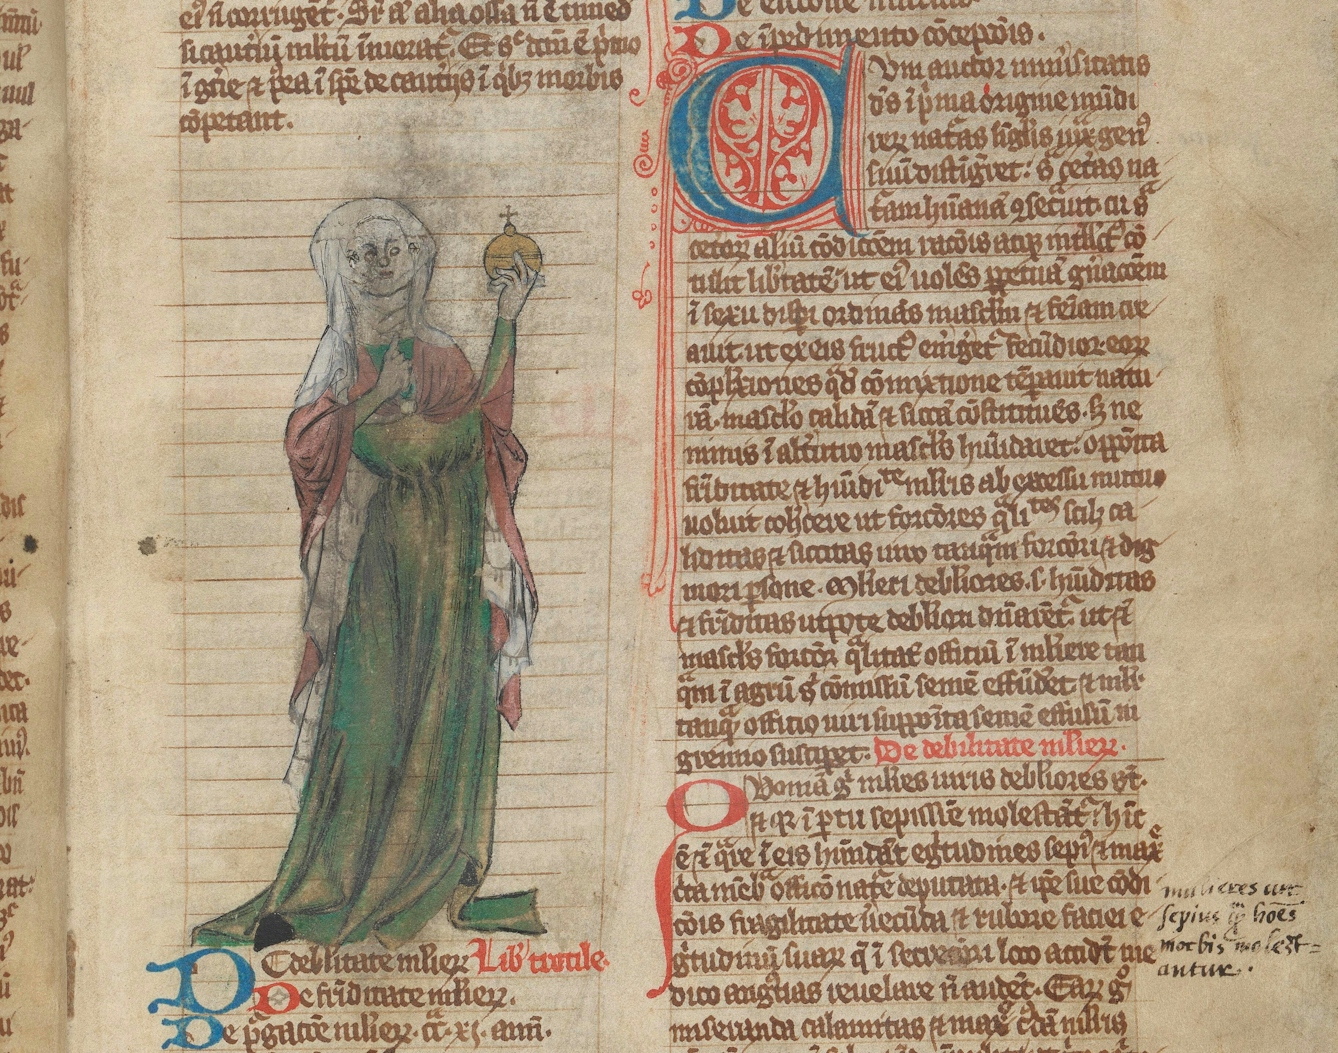 Pen and wash drawing showing a standing female healer, perhaps of Trotula, clothed in red and green with a white headdress, holding up a urine flask to which she points with her right hand.